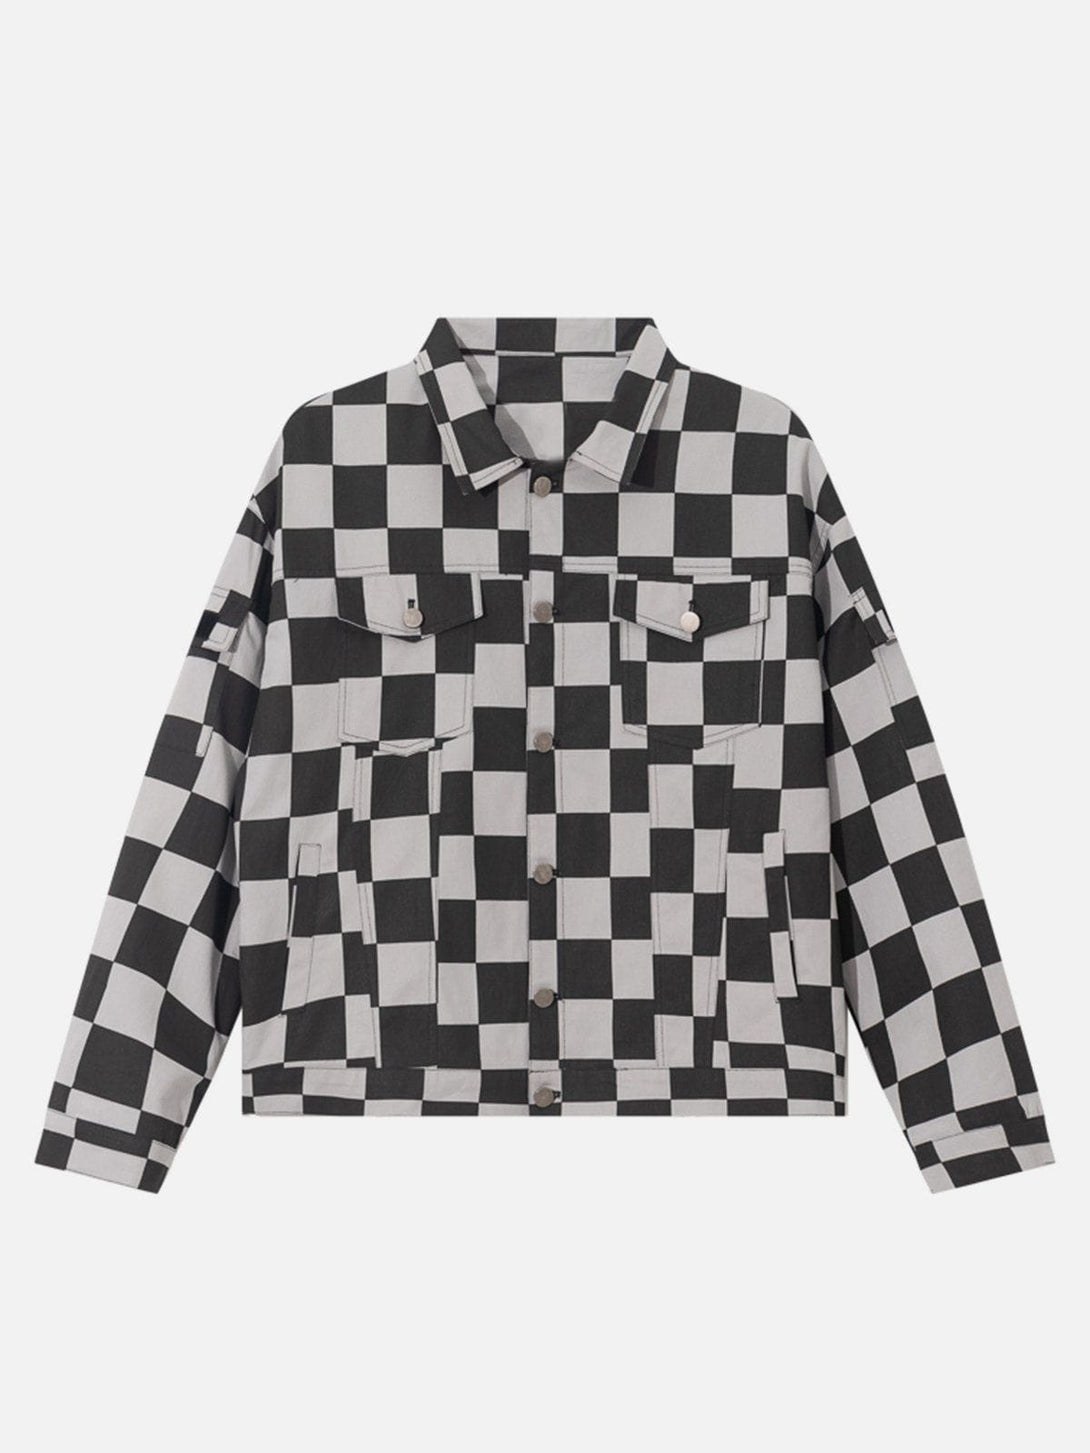 Ellesey - Circle Text Graphic Checkerboard Jacket- Streetwear Fashion - ellesey.com